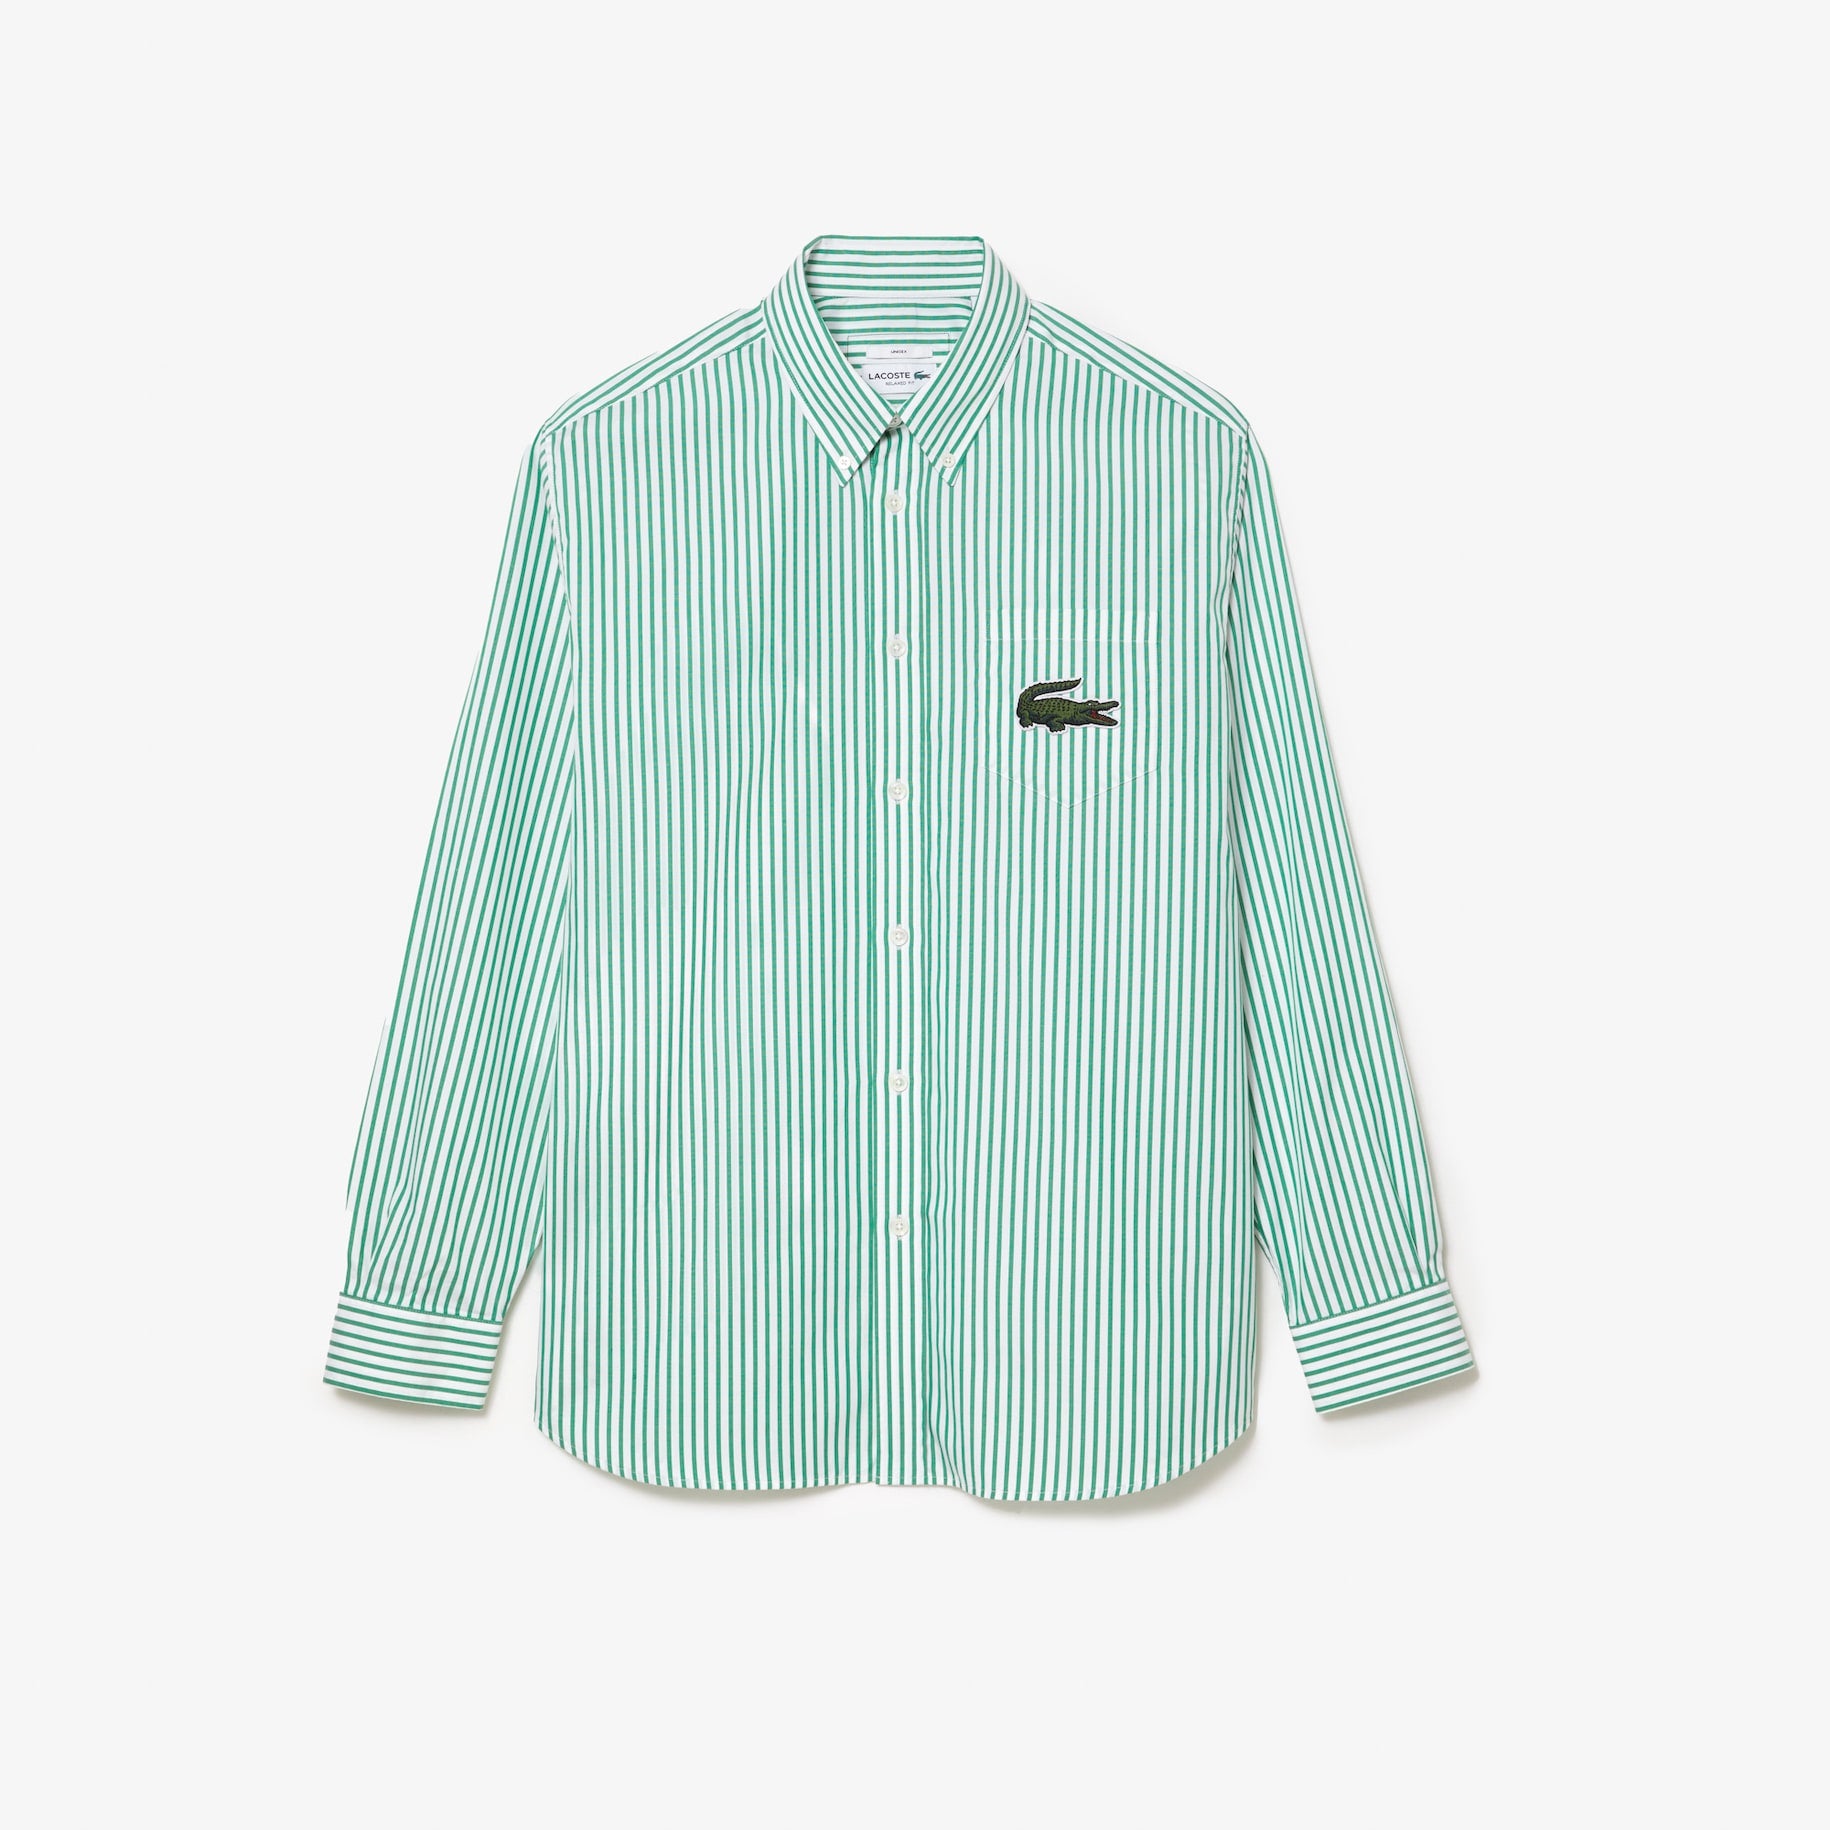 Lacoste - Relaxed Fit Large Croc Stripe Shirt - White/Green